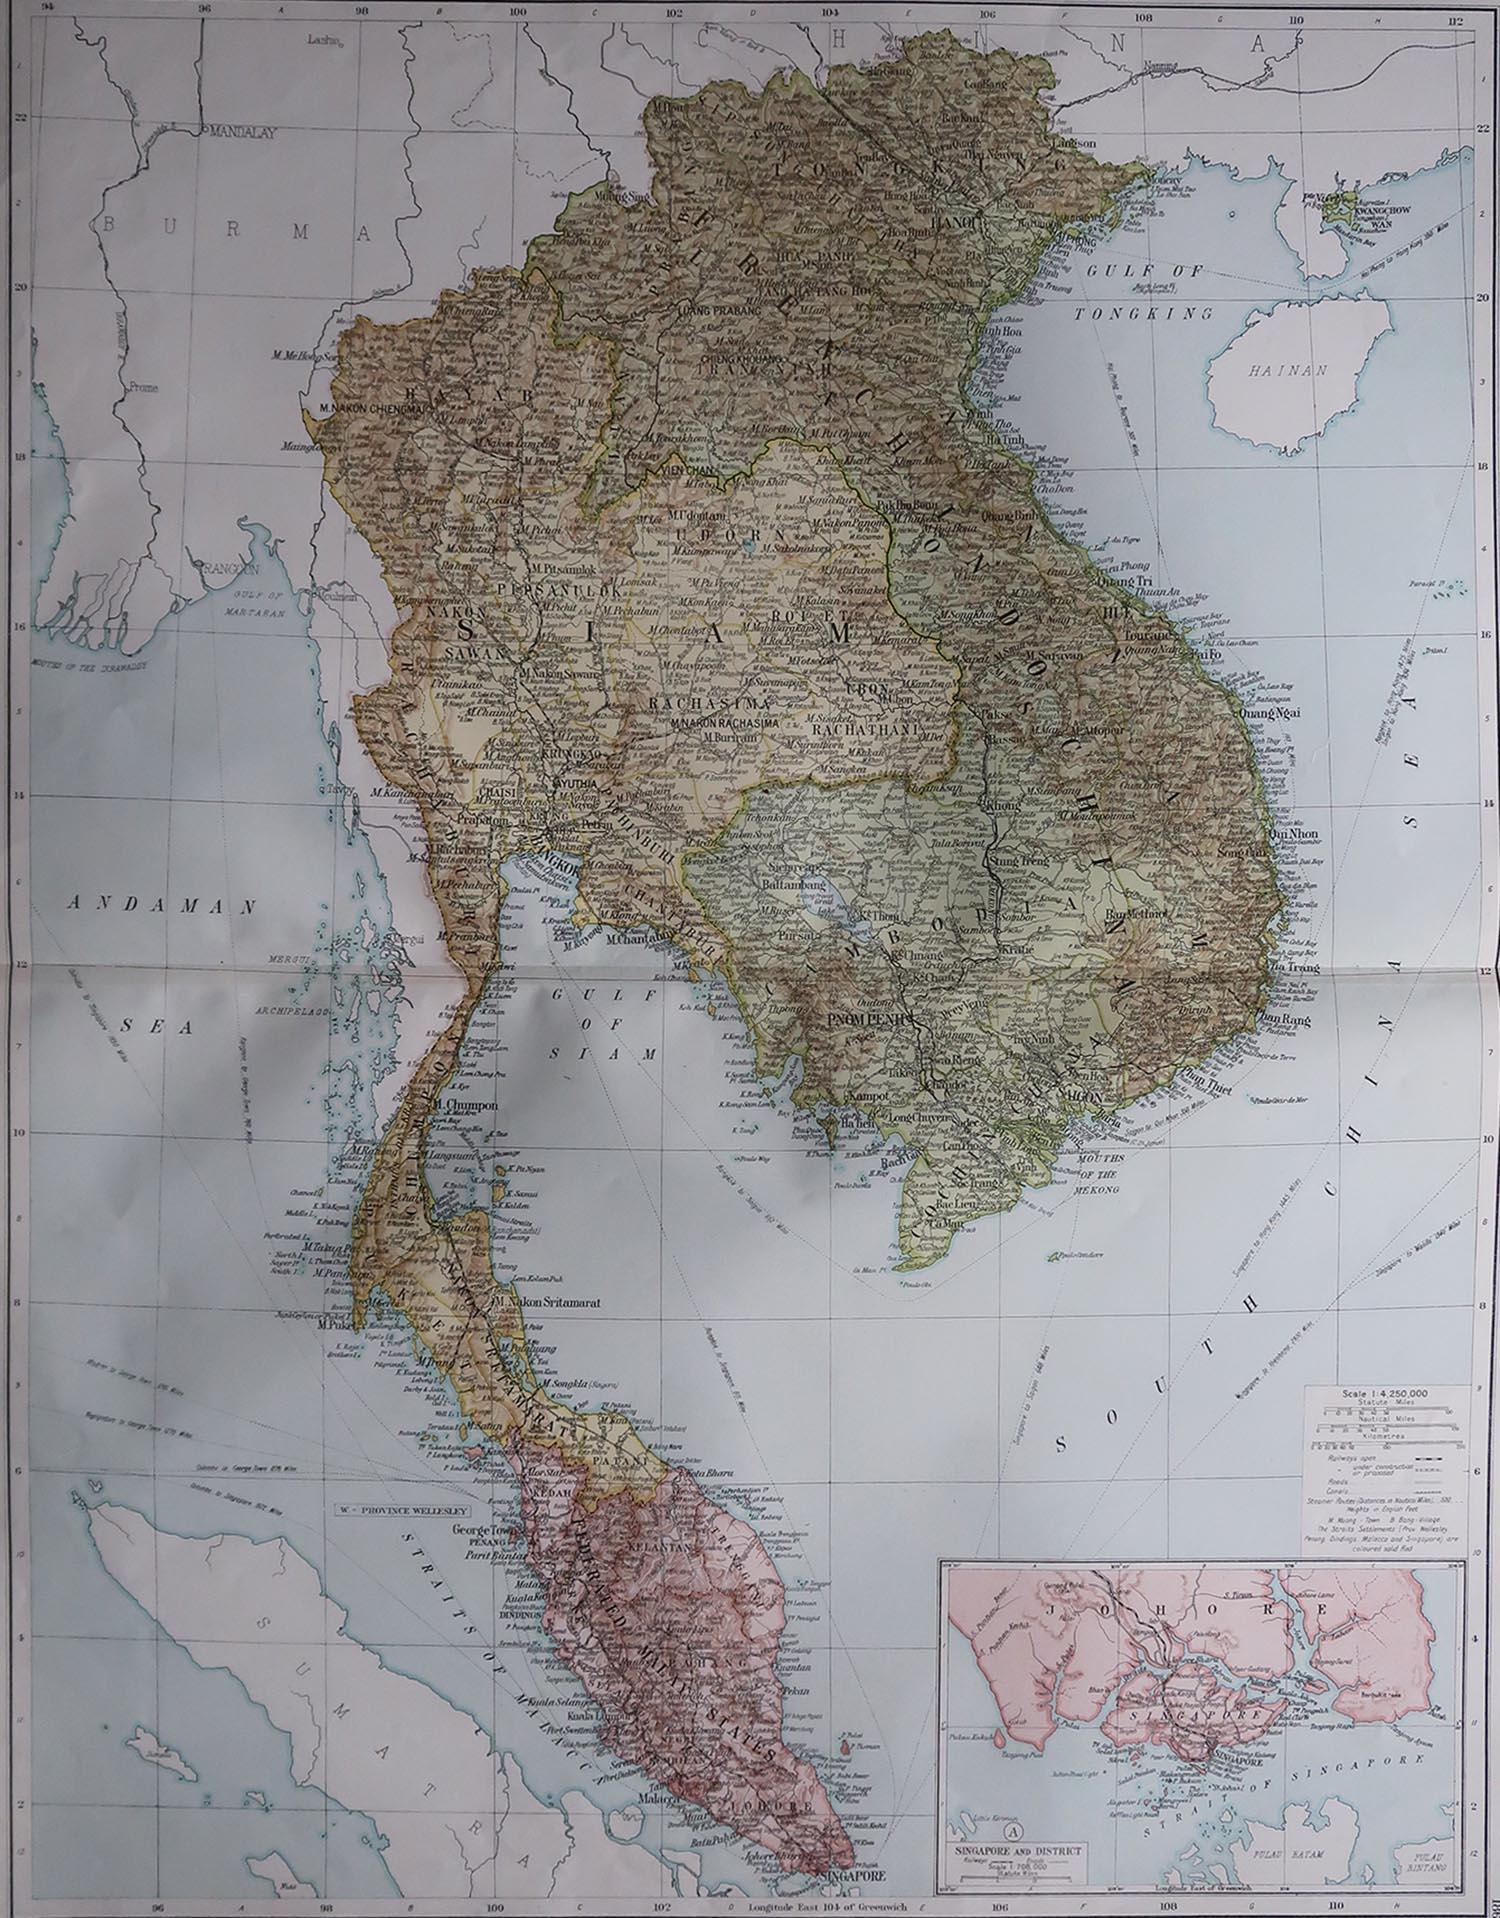 Great map of South East Asia 

Original color. Good condition

Published by Alexander Gross

Unframed.








